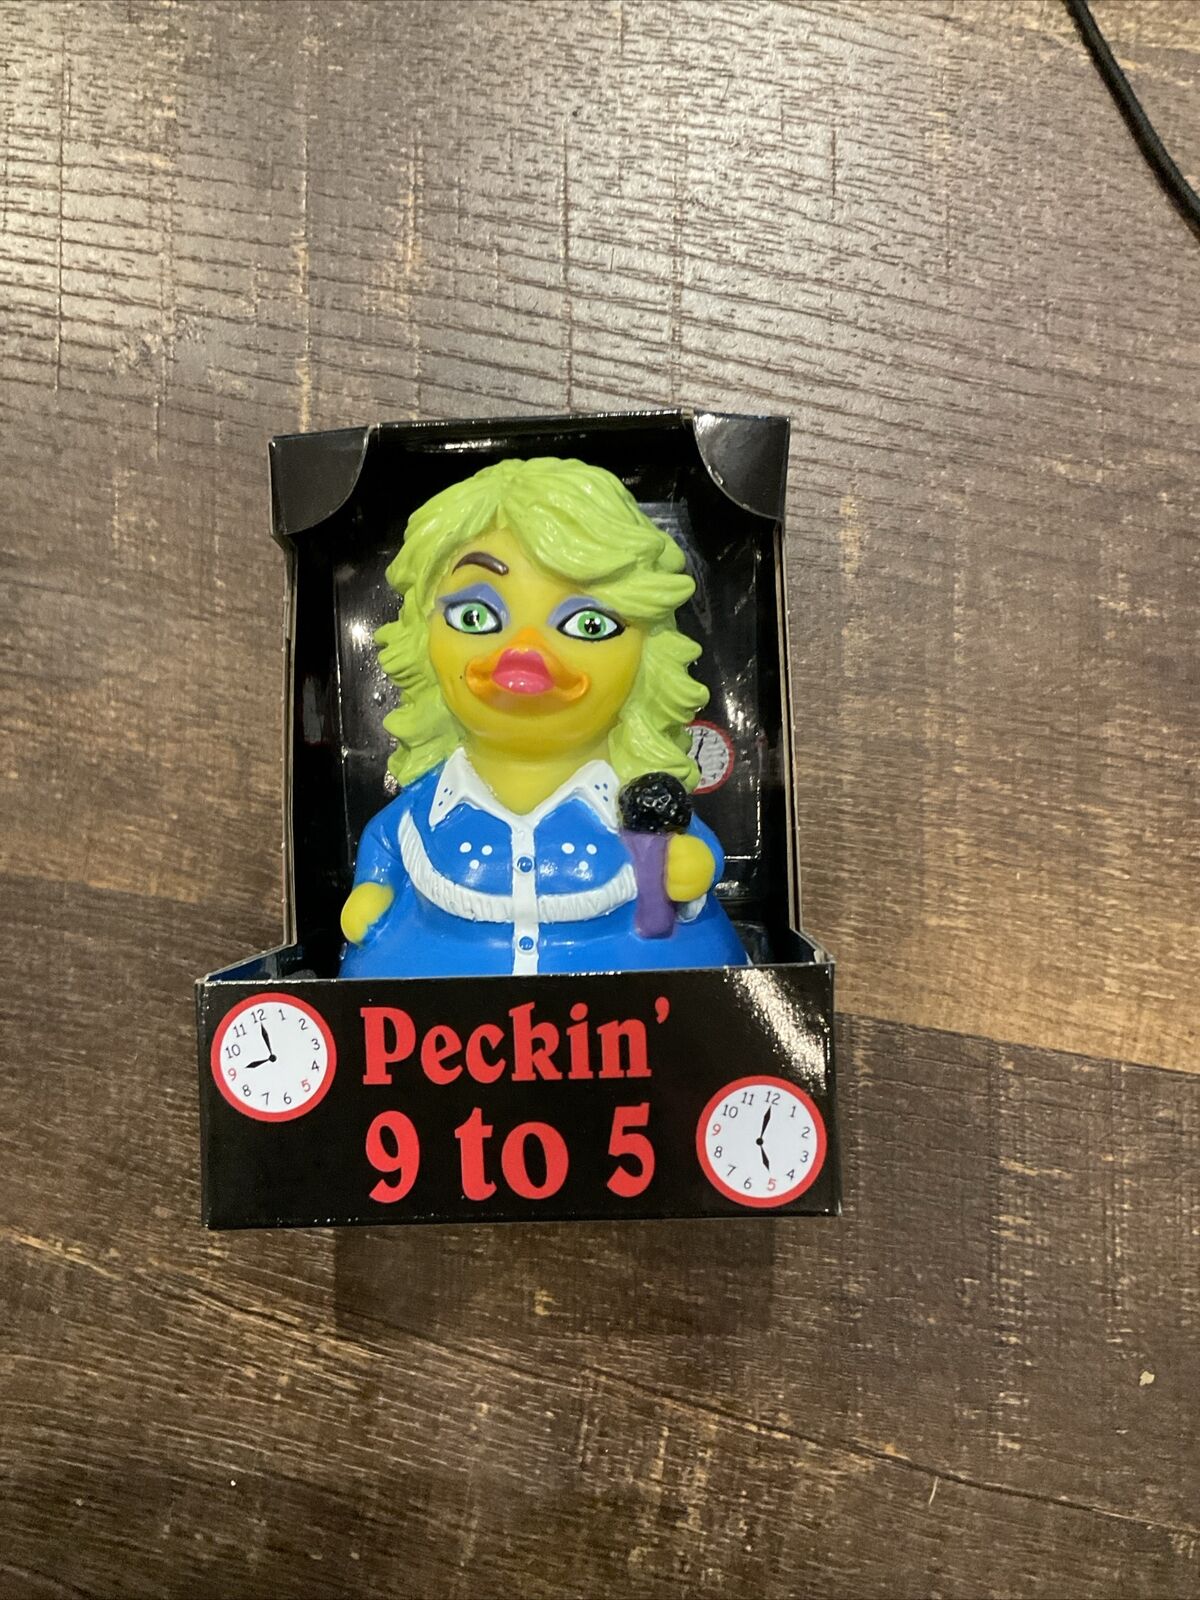 Dolly Parton Duck SOLD OUT CelebriDuck